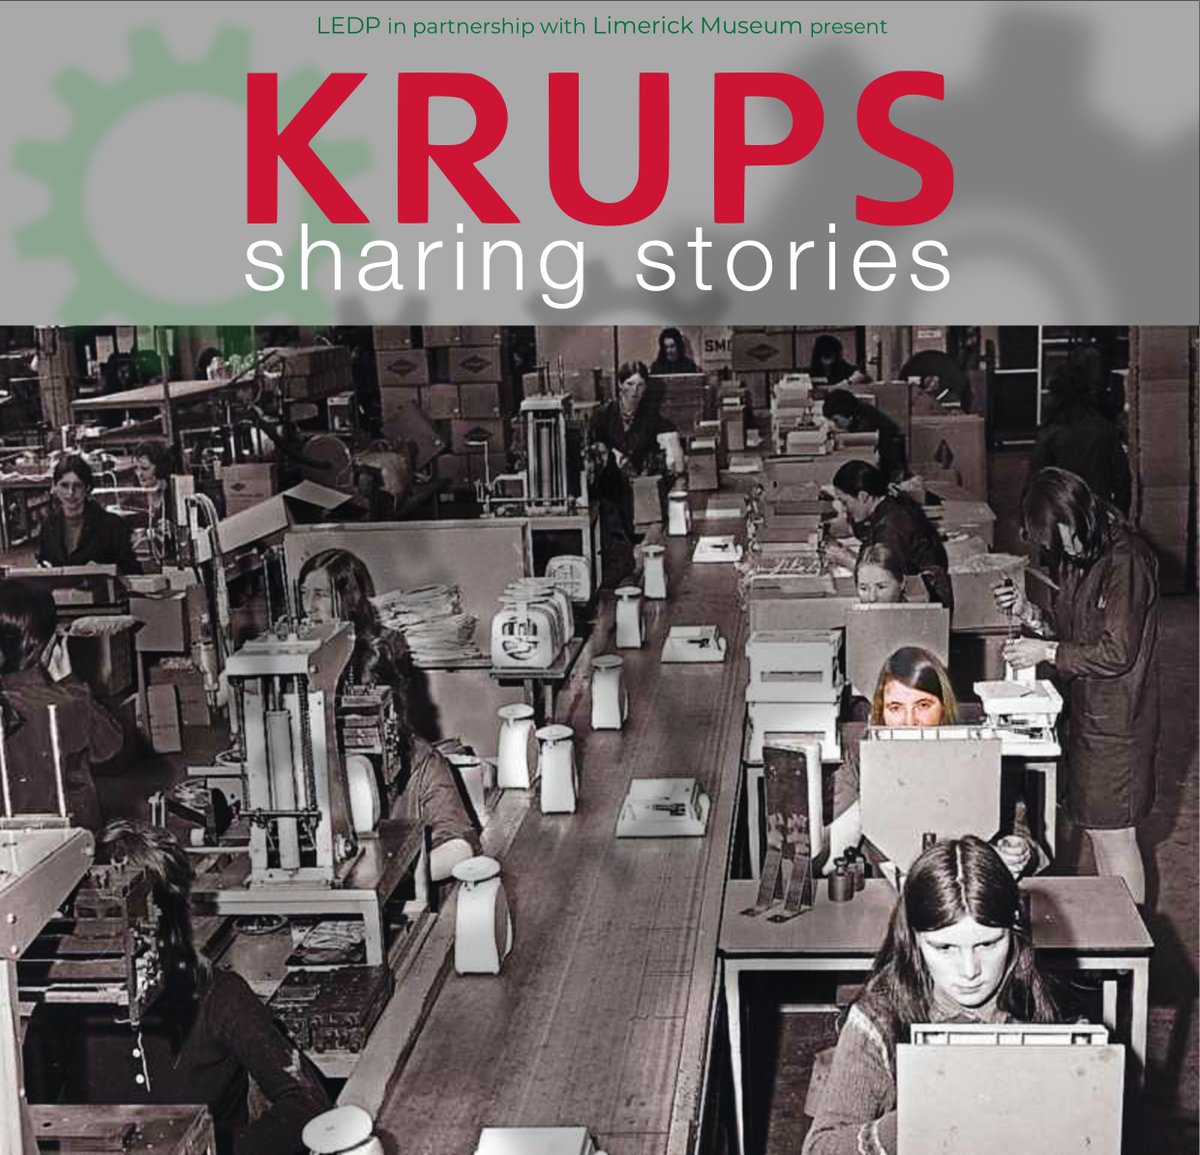 Memorabilia sought for Krups Exhibition! We will be holding 3 Open Days at the LEDP (the site of the old Krups Factory) from: 9-11 April - 10.30am to 3pm each day Please share your artefacts and memorabilia from a time in Limerick's #History #Limerick #Krups #share #stories